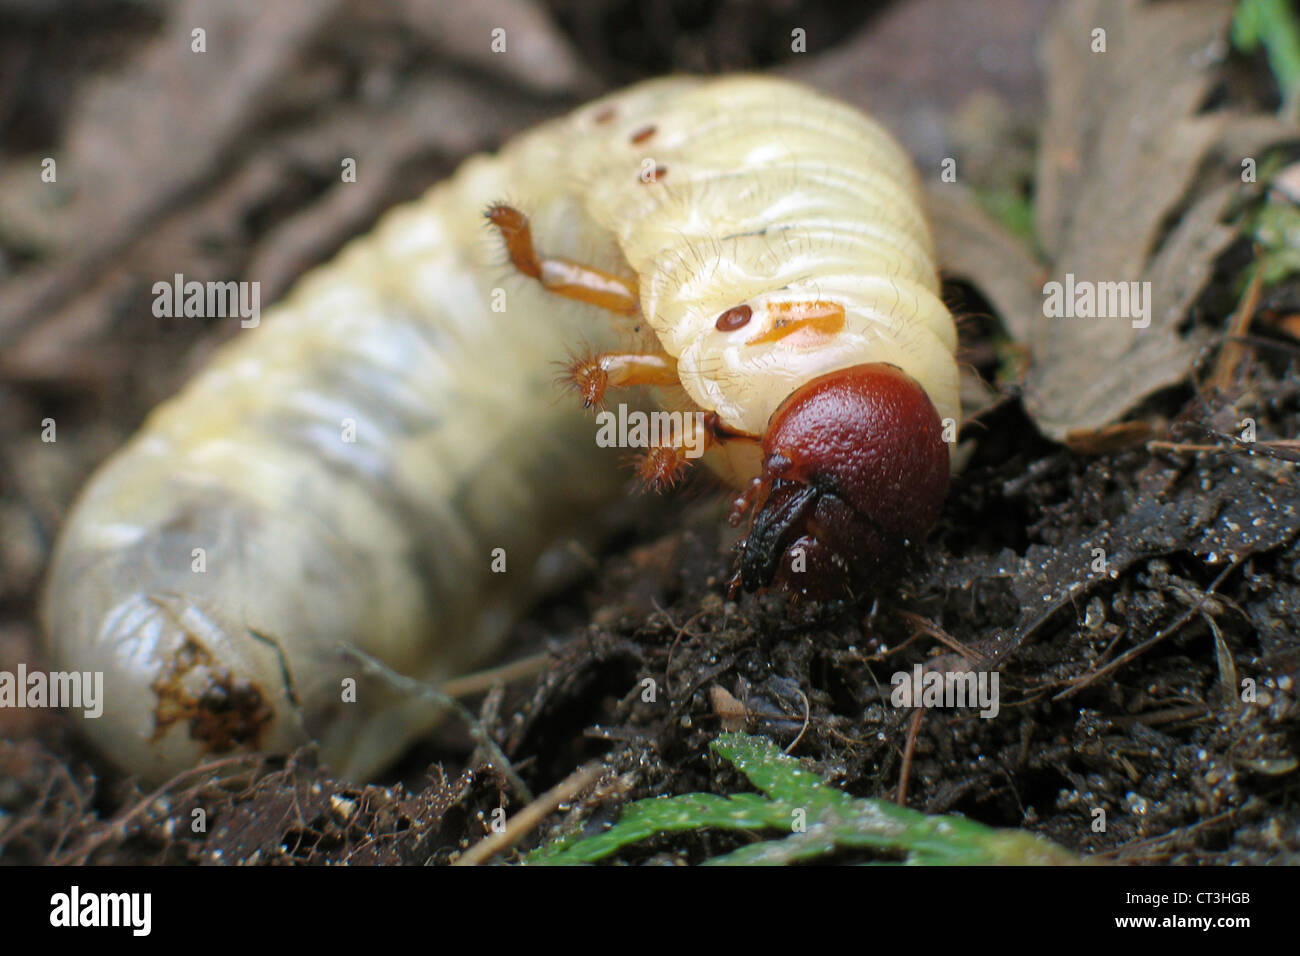 Berlin, a white grub on a dunghill Stock Photo